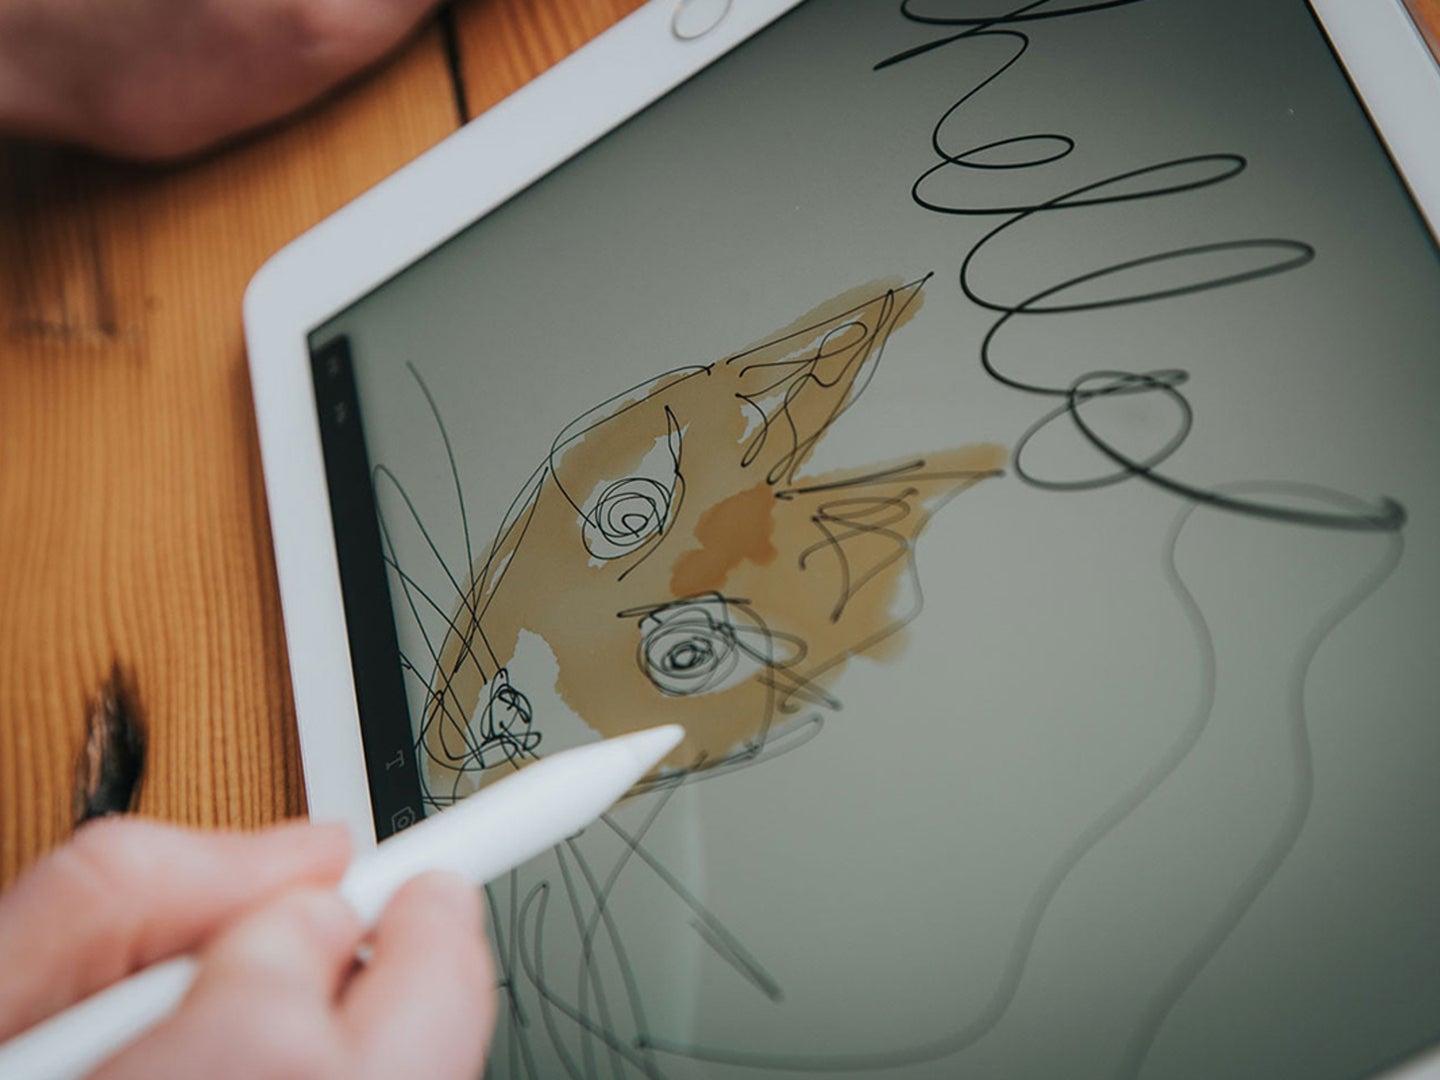 A young child drawing on an iPad using an Apple Pencil